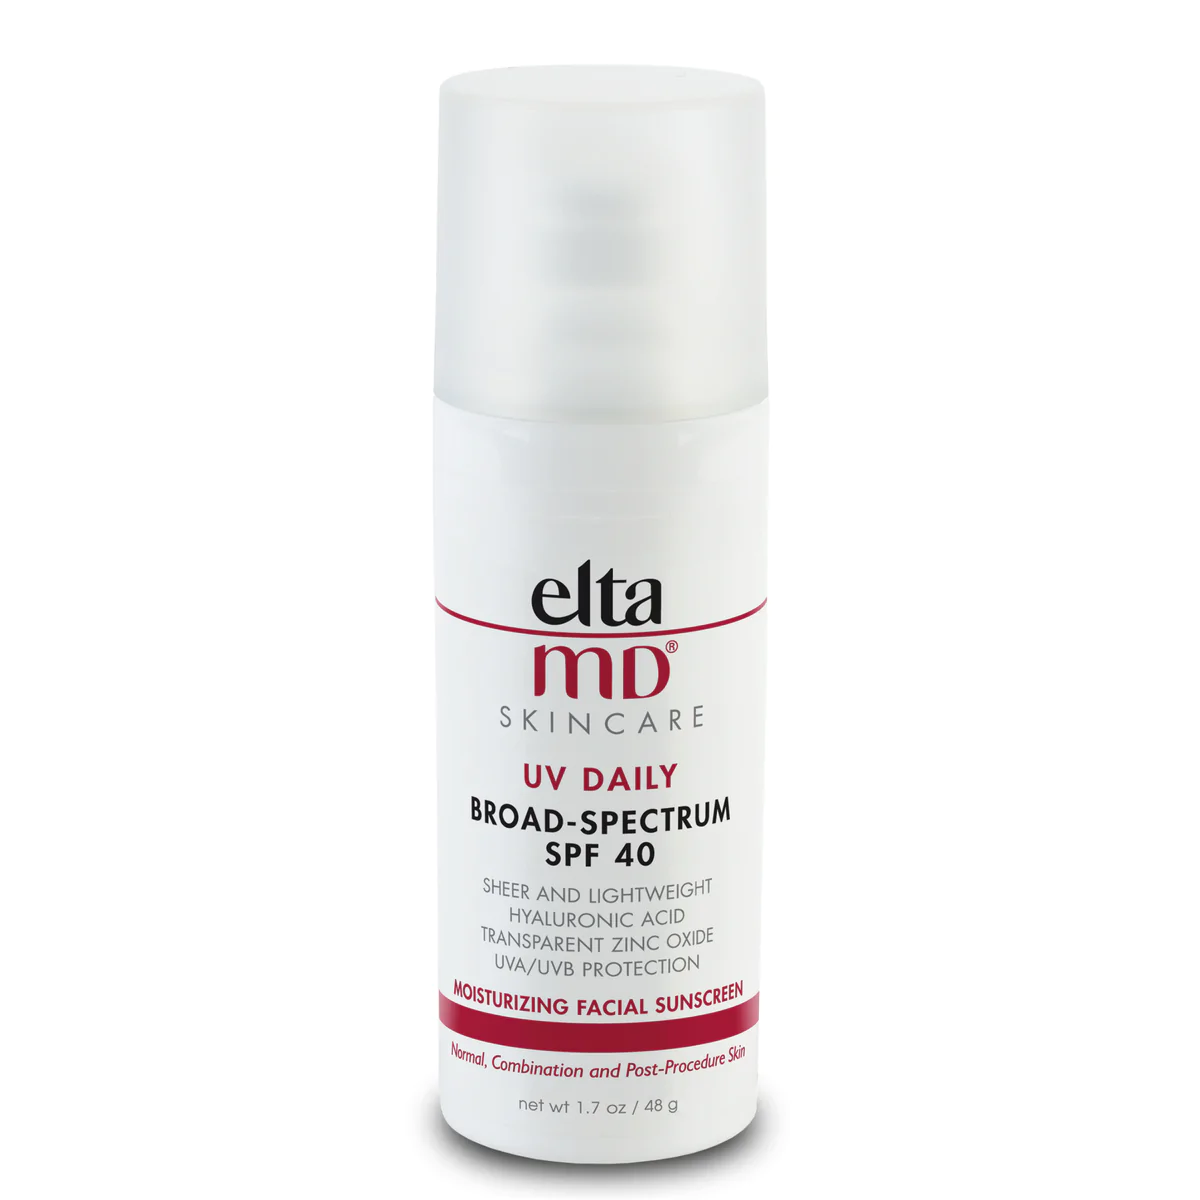 FEMMENORDIC's choice in the Elta MD UV Daily vs UV Clear sunscreen comparison, the Elta MD UV Daily Broad-Spectrum SPF 40